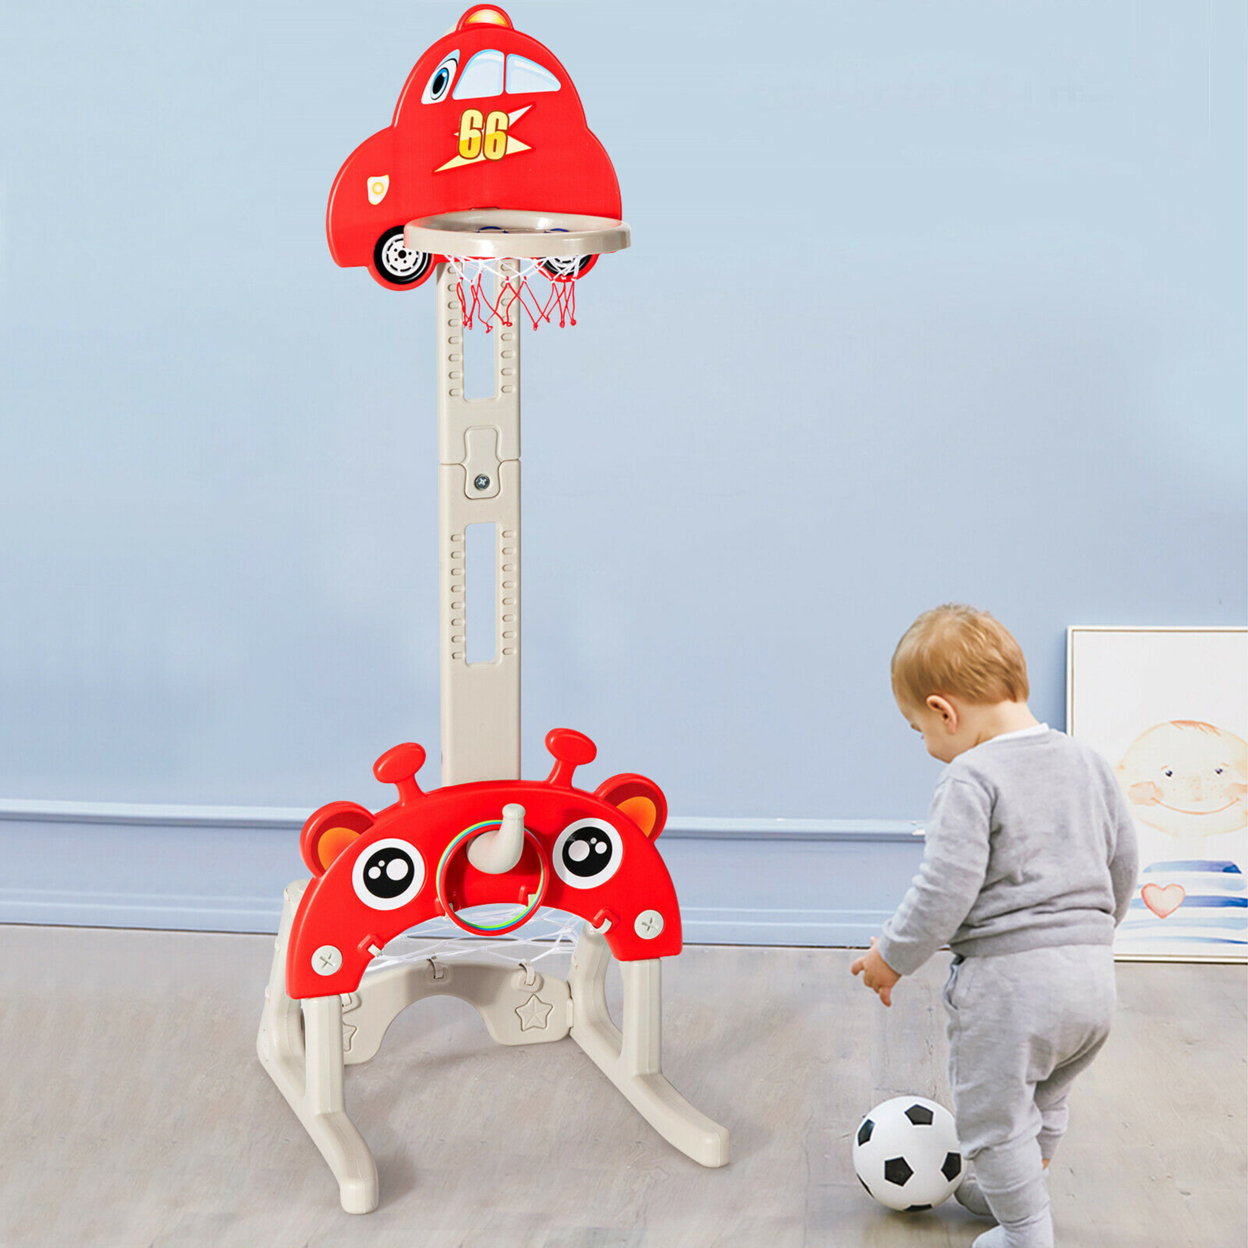 3-in-1 Basketball Hoop For Kids Adjustable Height Playset W/ Balls Red